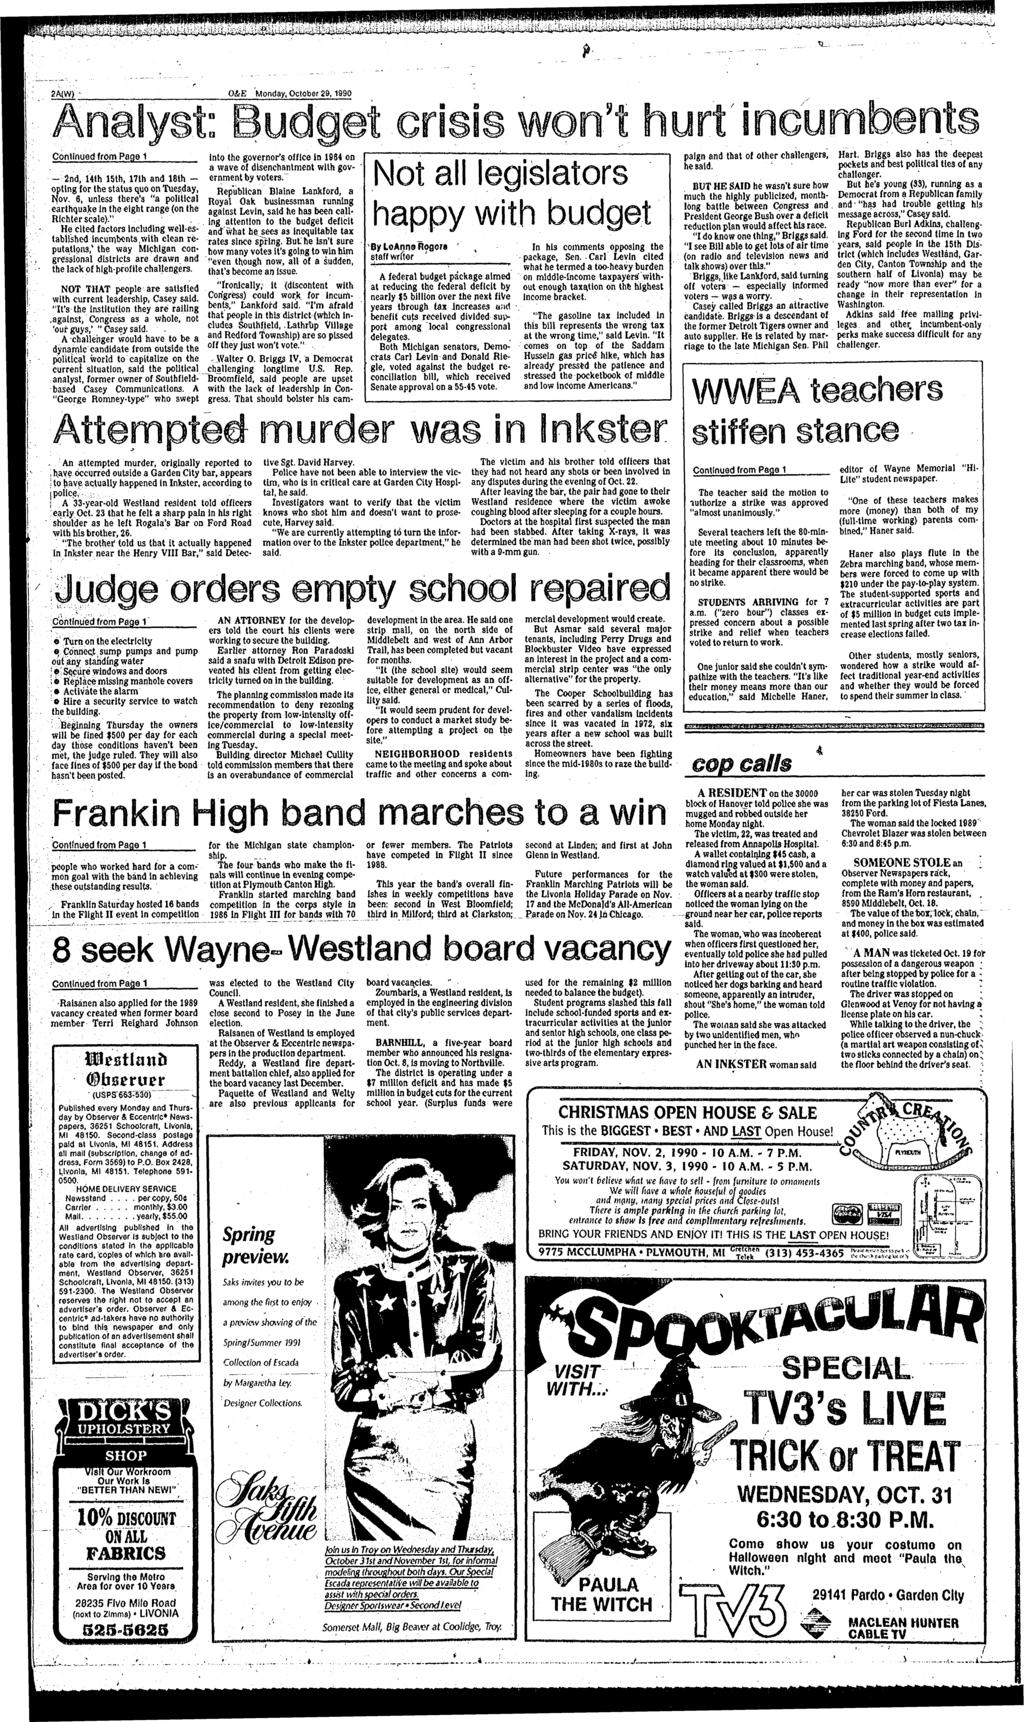 2A(WP O&E Monday, October 29,1990 Contnued from Page 1-2nd, 14th 15th, 17lh and 18th - optng for the status quo on Tuesday, Nov.